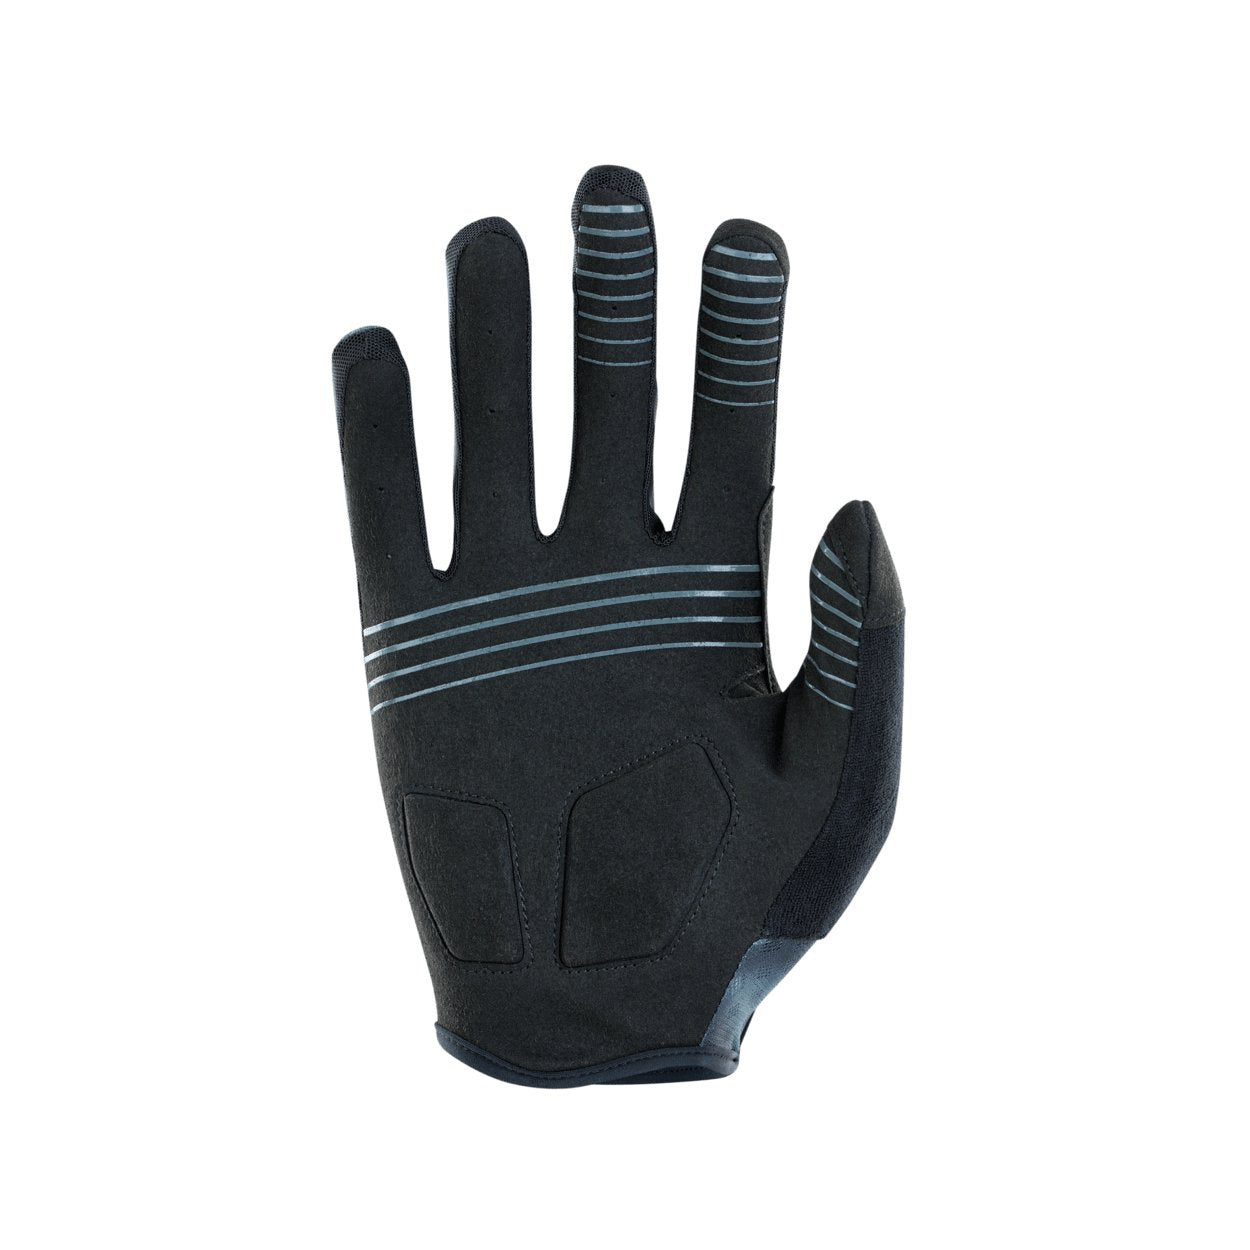 ION MTB Gloves Traze Long 2022 - Worthing Watersports - 9010583027999 - Gloves - ION Bike